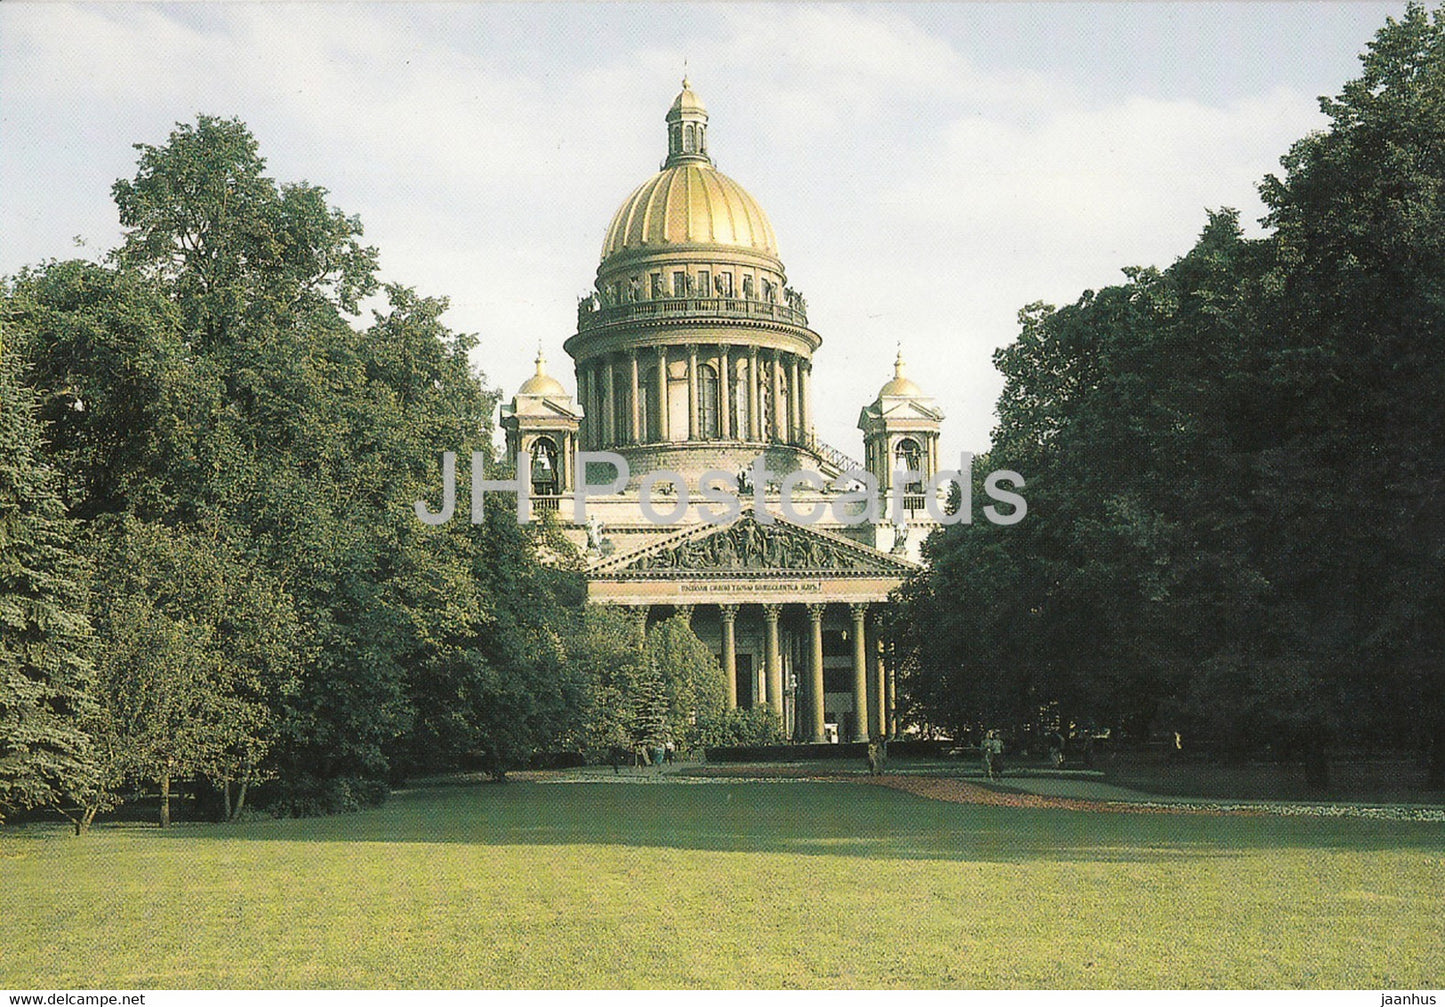 Leningrad - St Petersburg - St Isaac's Cathedral - Russia USSR - unused - JH Postcards